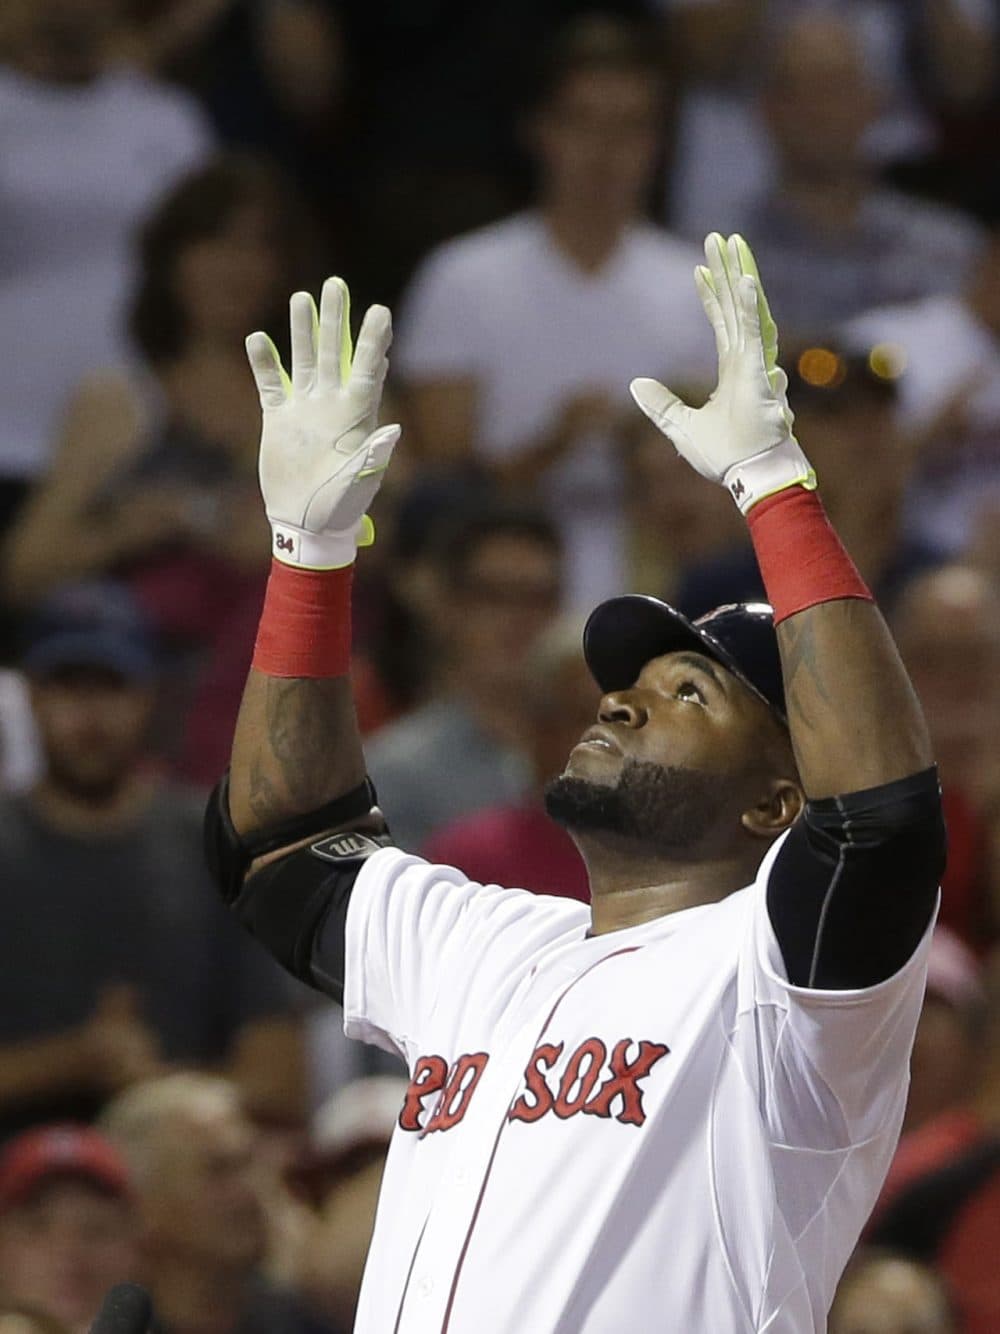 David Ortiz celebrates a three-run home run as he arrives at home plate in the seventh inning of a game against the Tigers at Fenway, Sunday, July 26, 2015. It was the second three-run home run of the evening for Ortiz. (Steven Senne/AP)